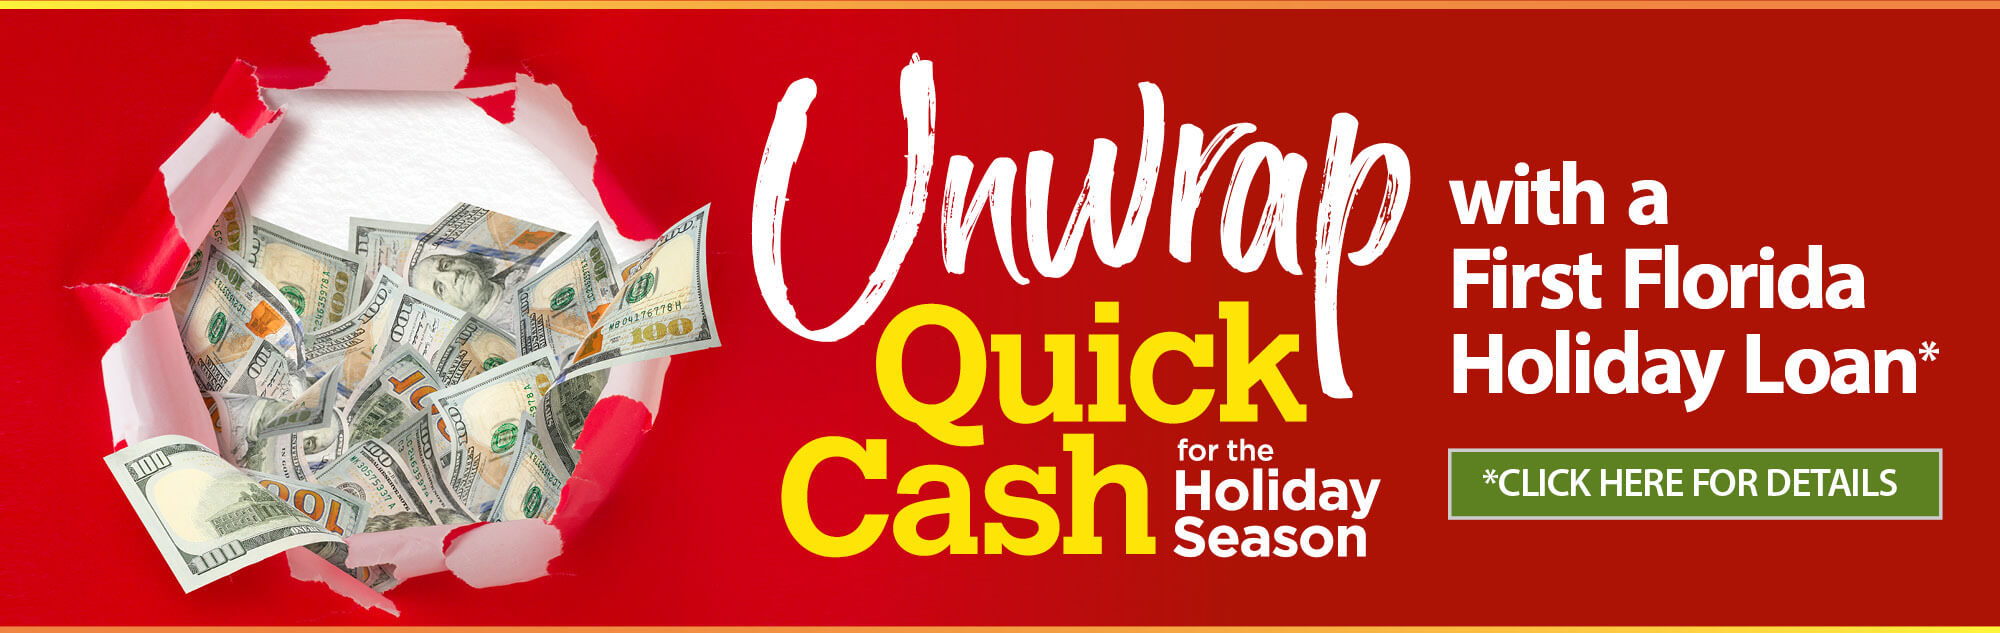 Unwrap Quick Cash with a First Florida Holiday Loan